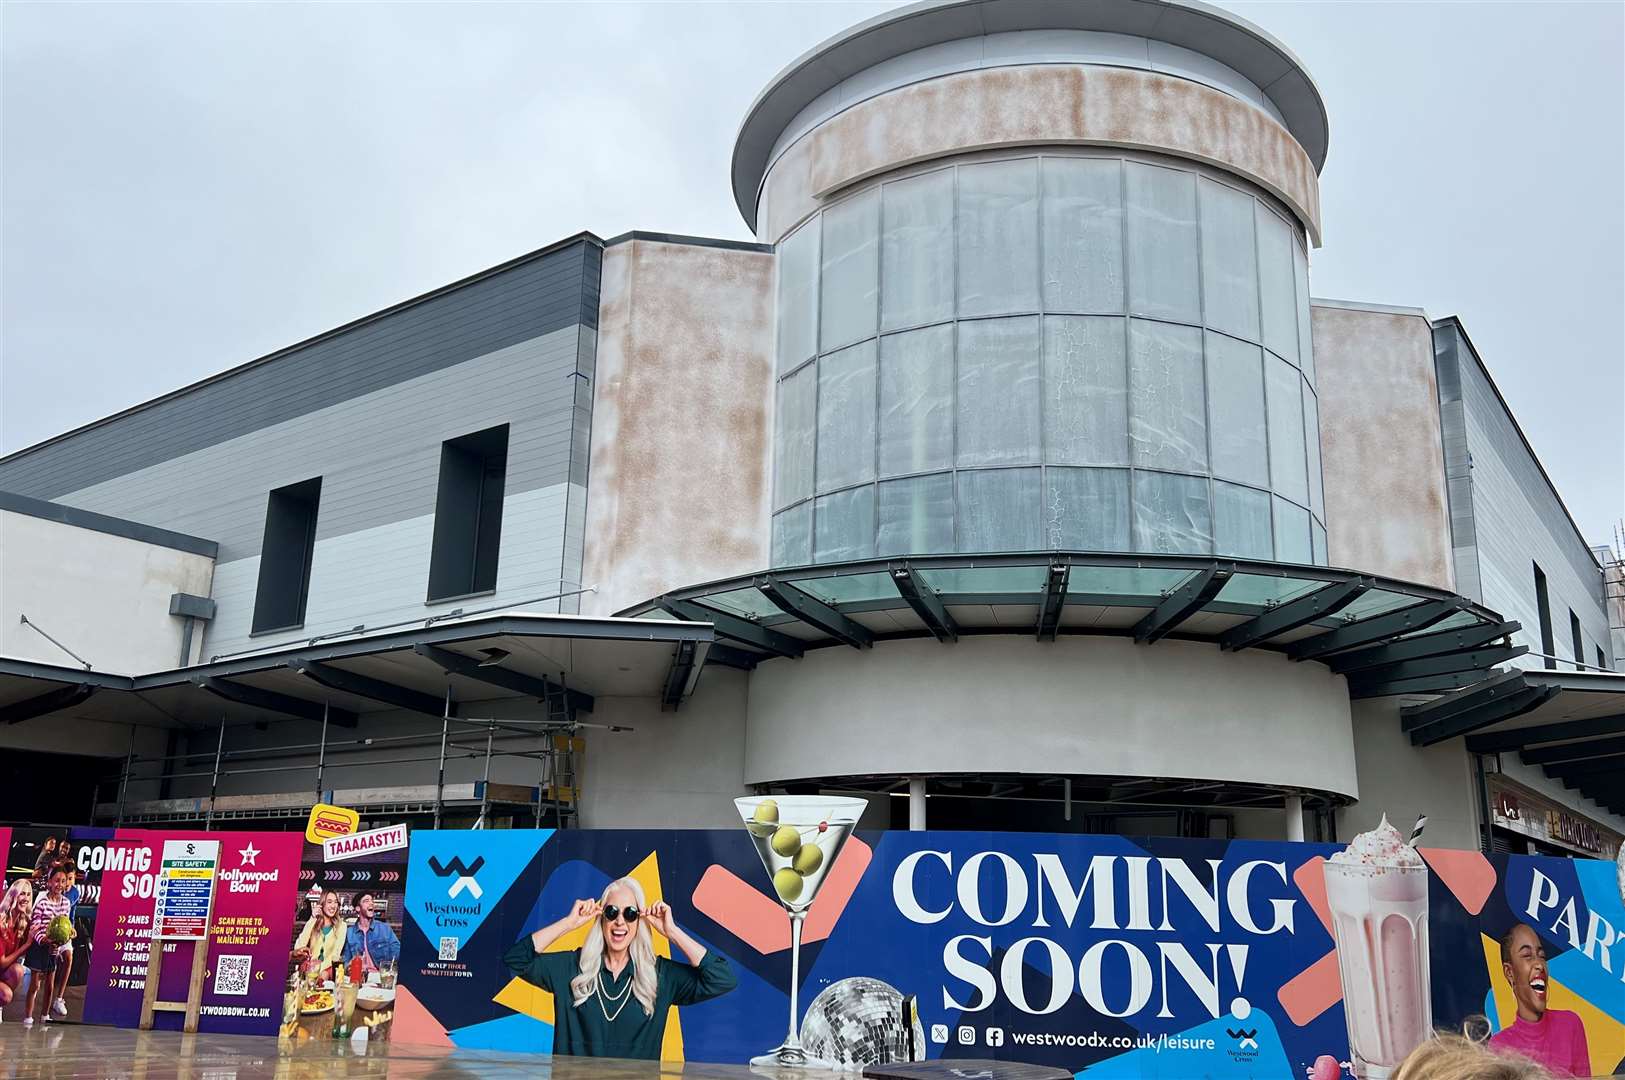 The former Debenhams at Westwood Cross - Hollywood Bowl is coming soon, apparently